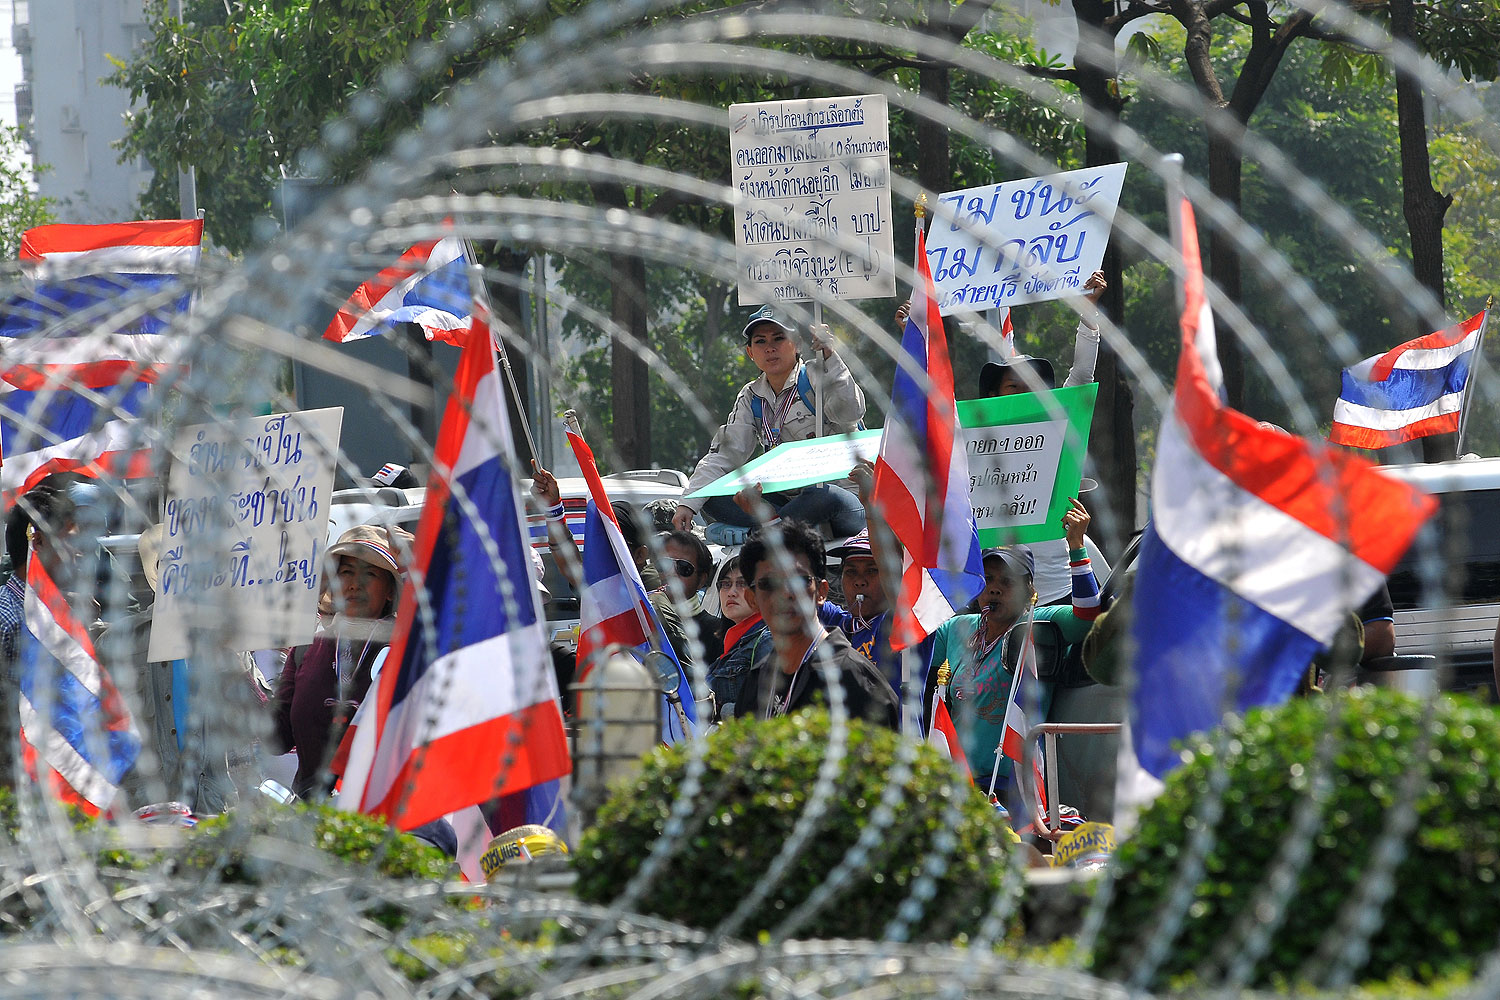 Anti-government protesters wave national flags as they block the street in front of the Office of the Defence Permanent Secretary during a rally in Bangkok on Jan. 22, 2014 (AFP / Getty Images)